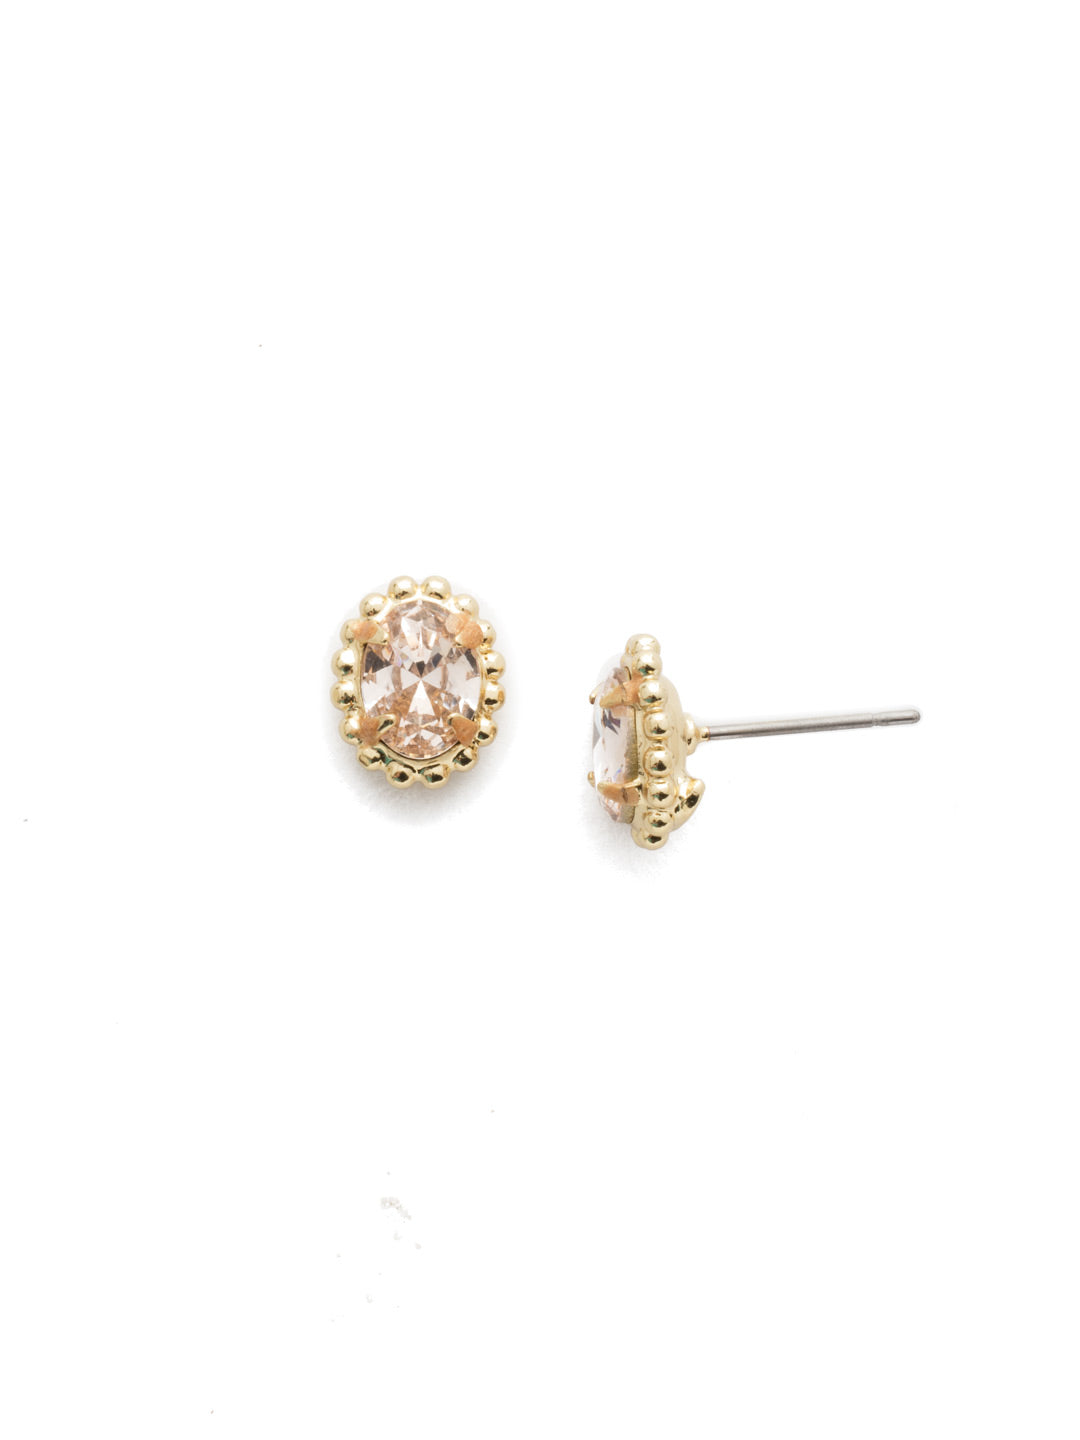 Maisie Stud Earrings - EEH11BGSIL - <p>The perfect oval stud earring for day-to-night wear. From Sorrelli's Silk collection in our Bright Gold-tone finish.</p>